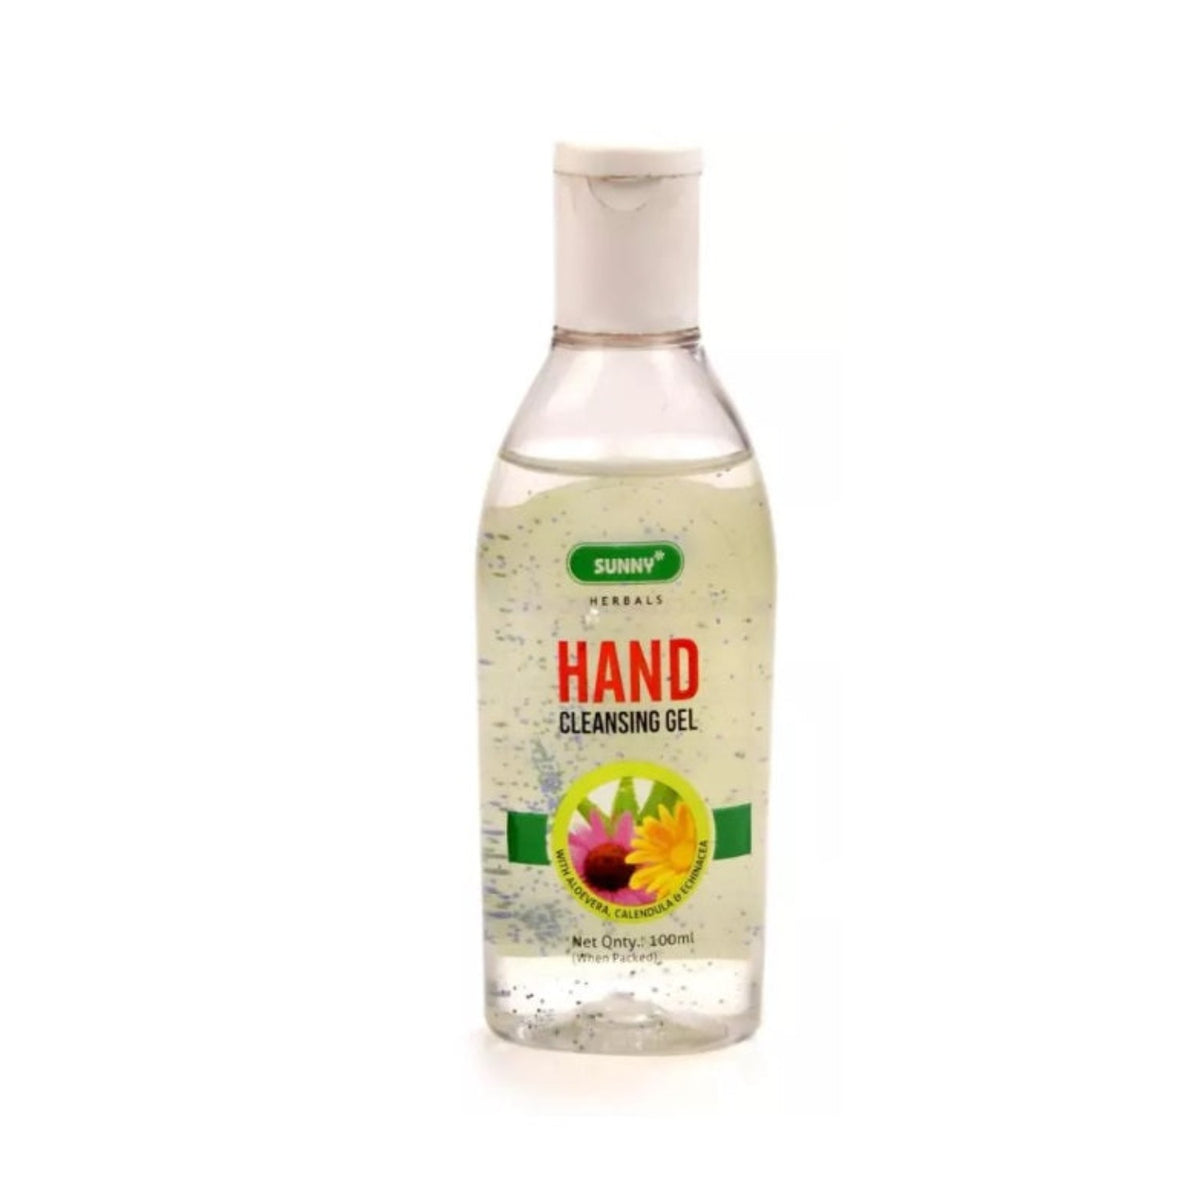 Bakson's Sunny Herbals Hand Cleansing With Aloevera,Calendula & Echinacea For Sanitization Gel 50ml